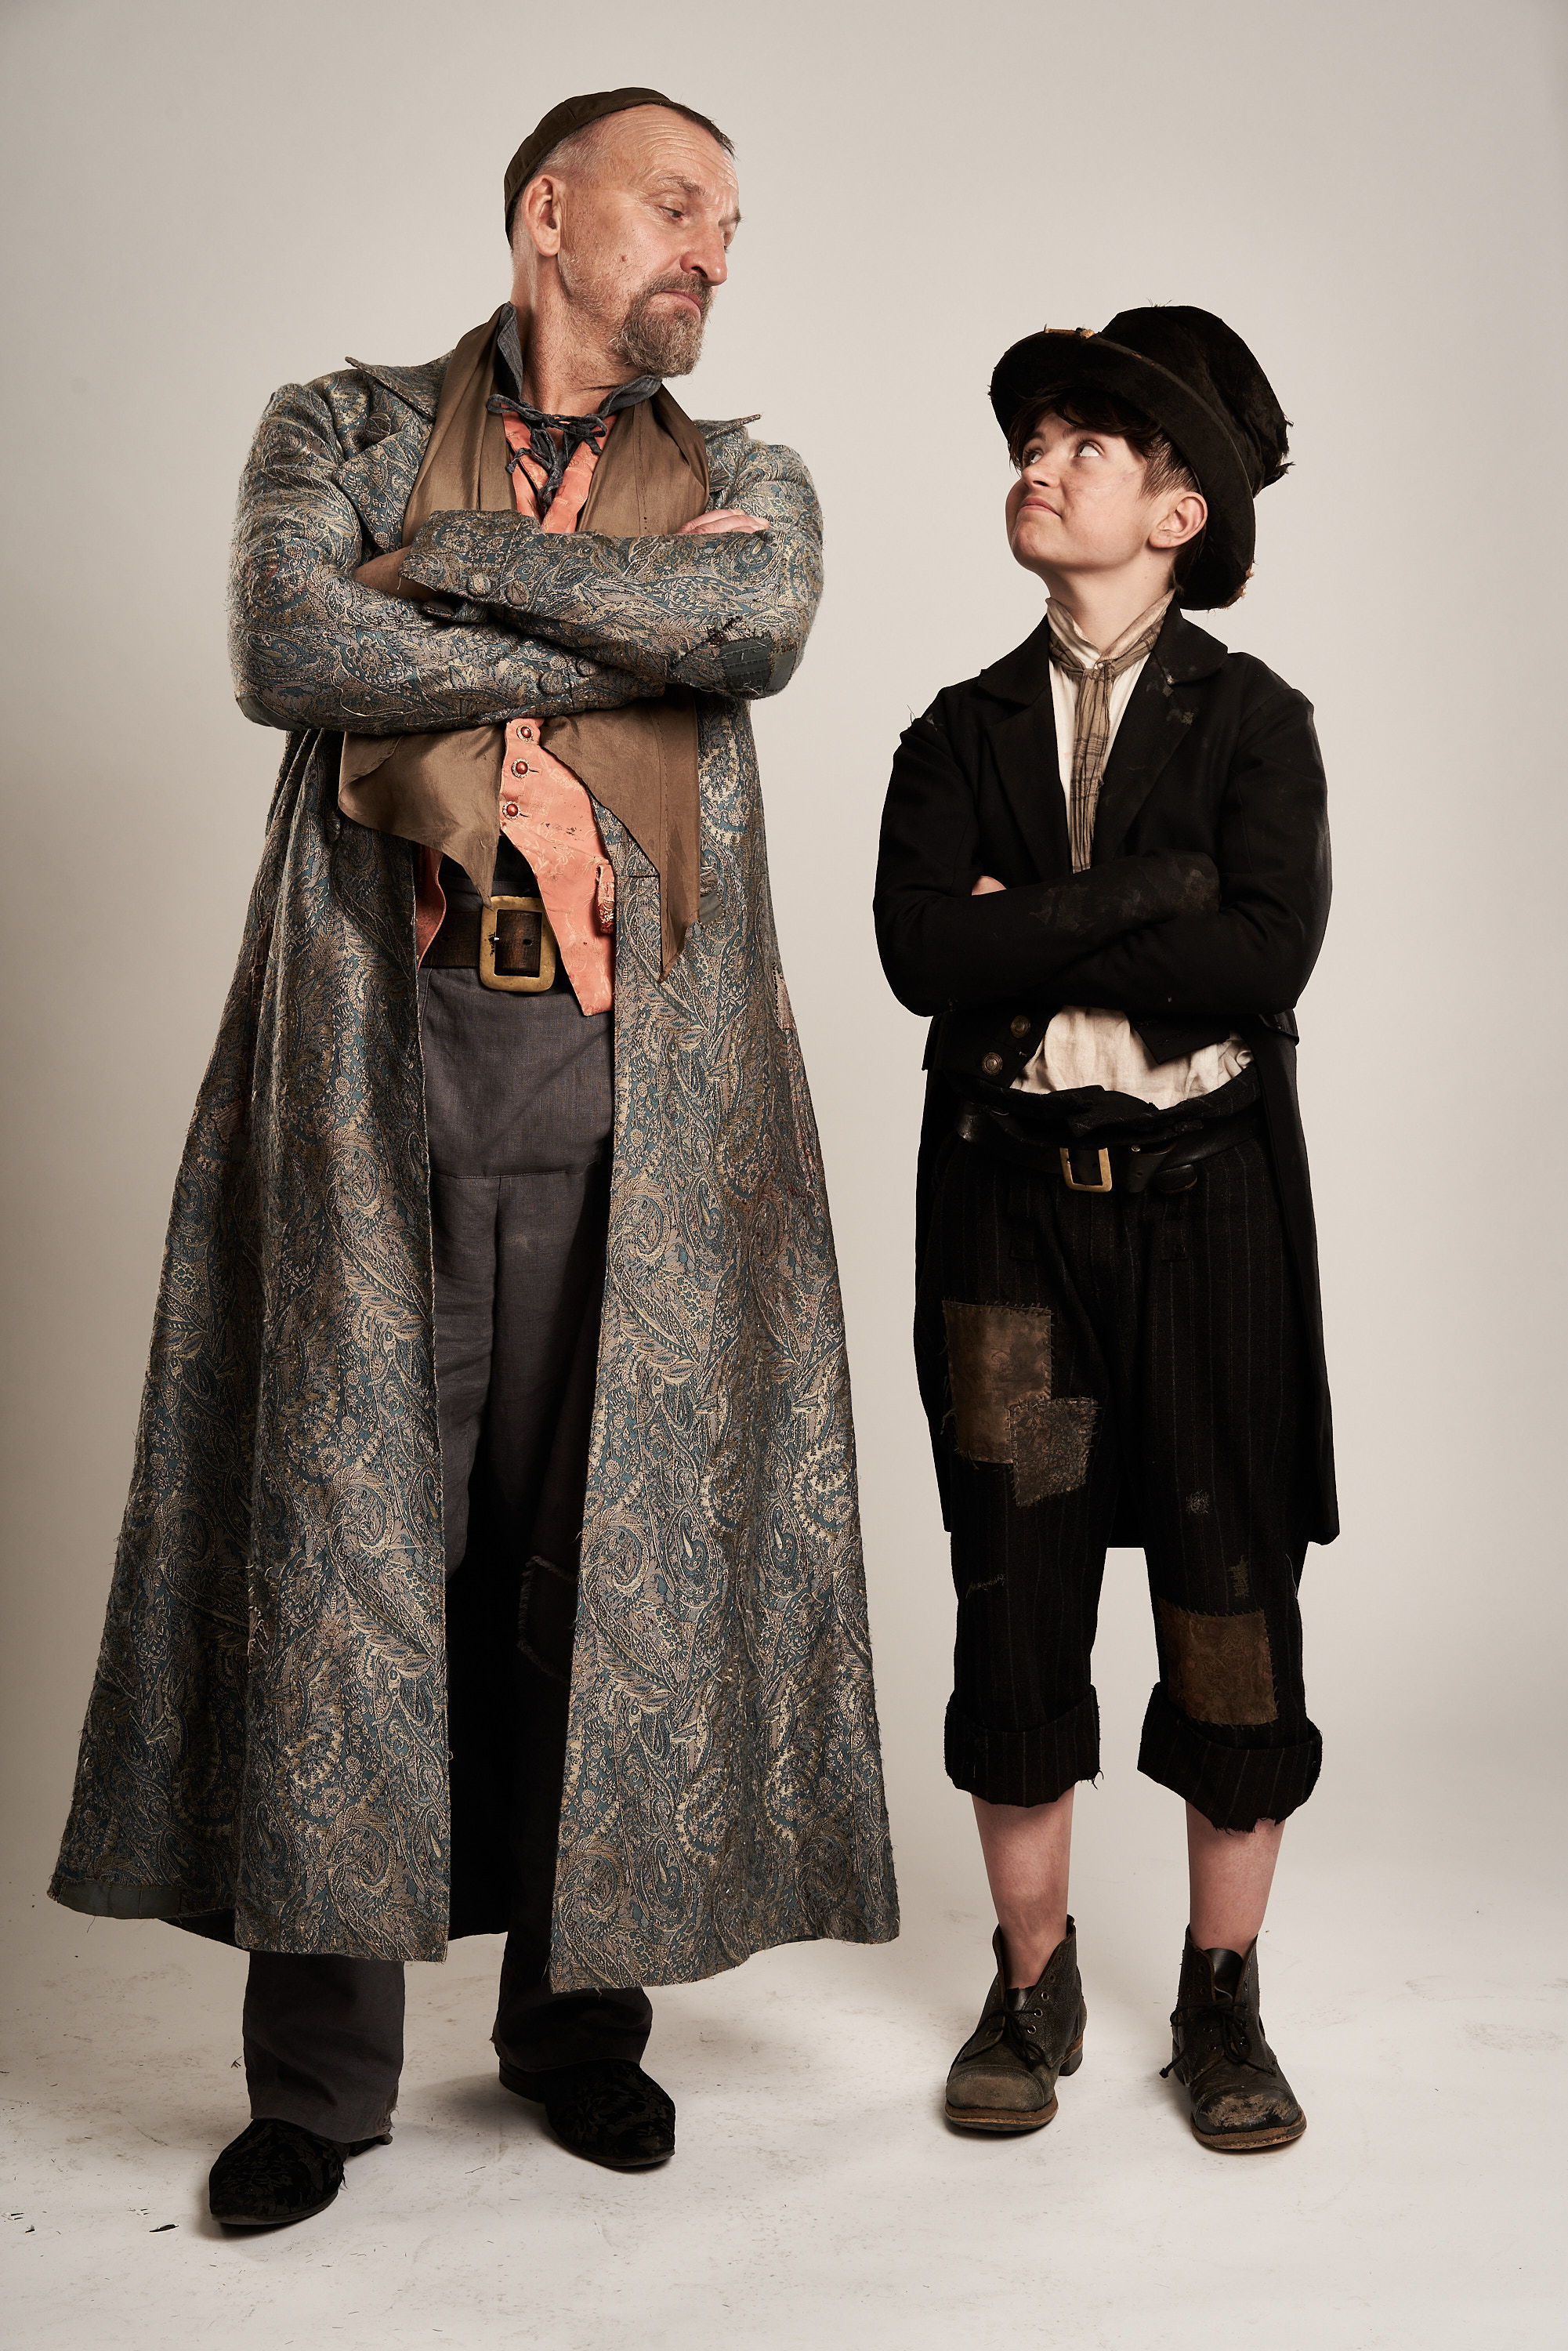 Christopher Eccleston as Fagin and Billy Jenkins as Dodger 